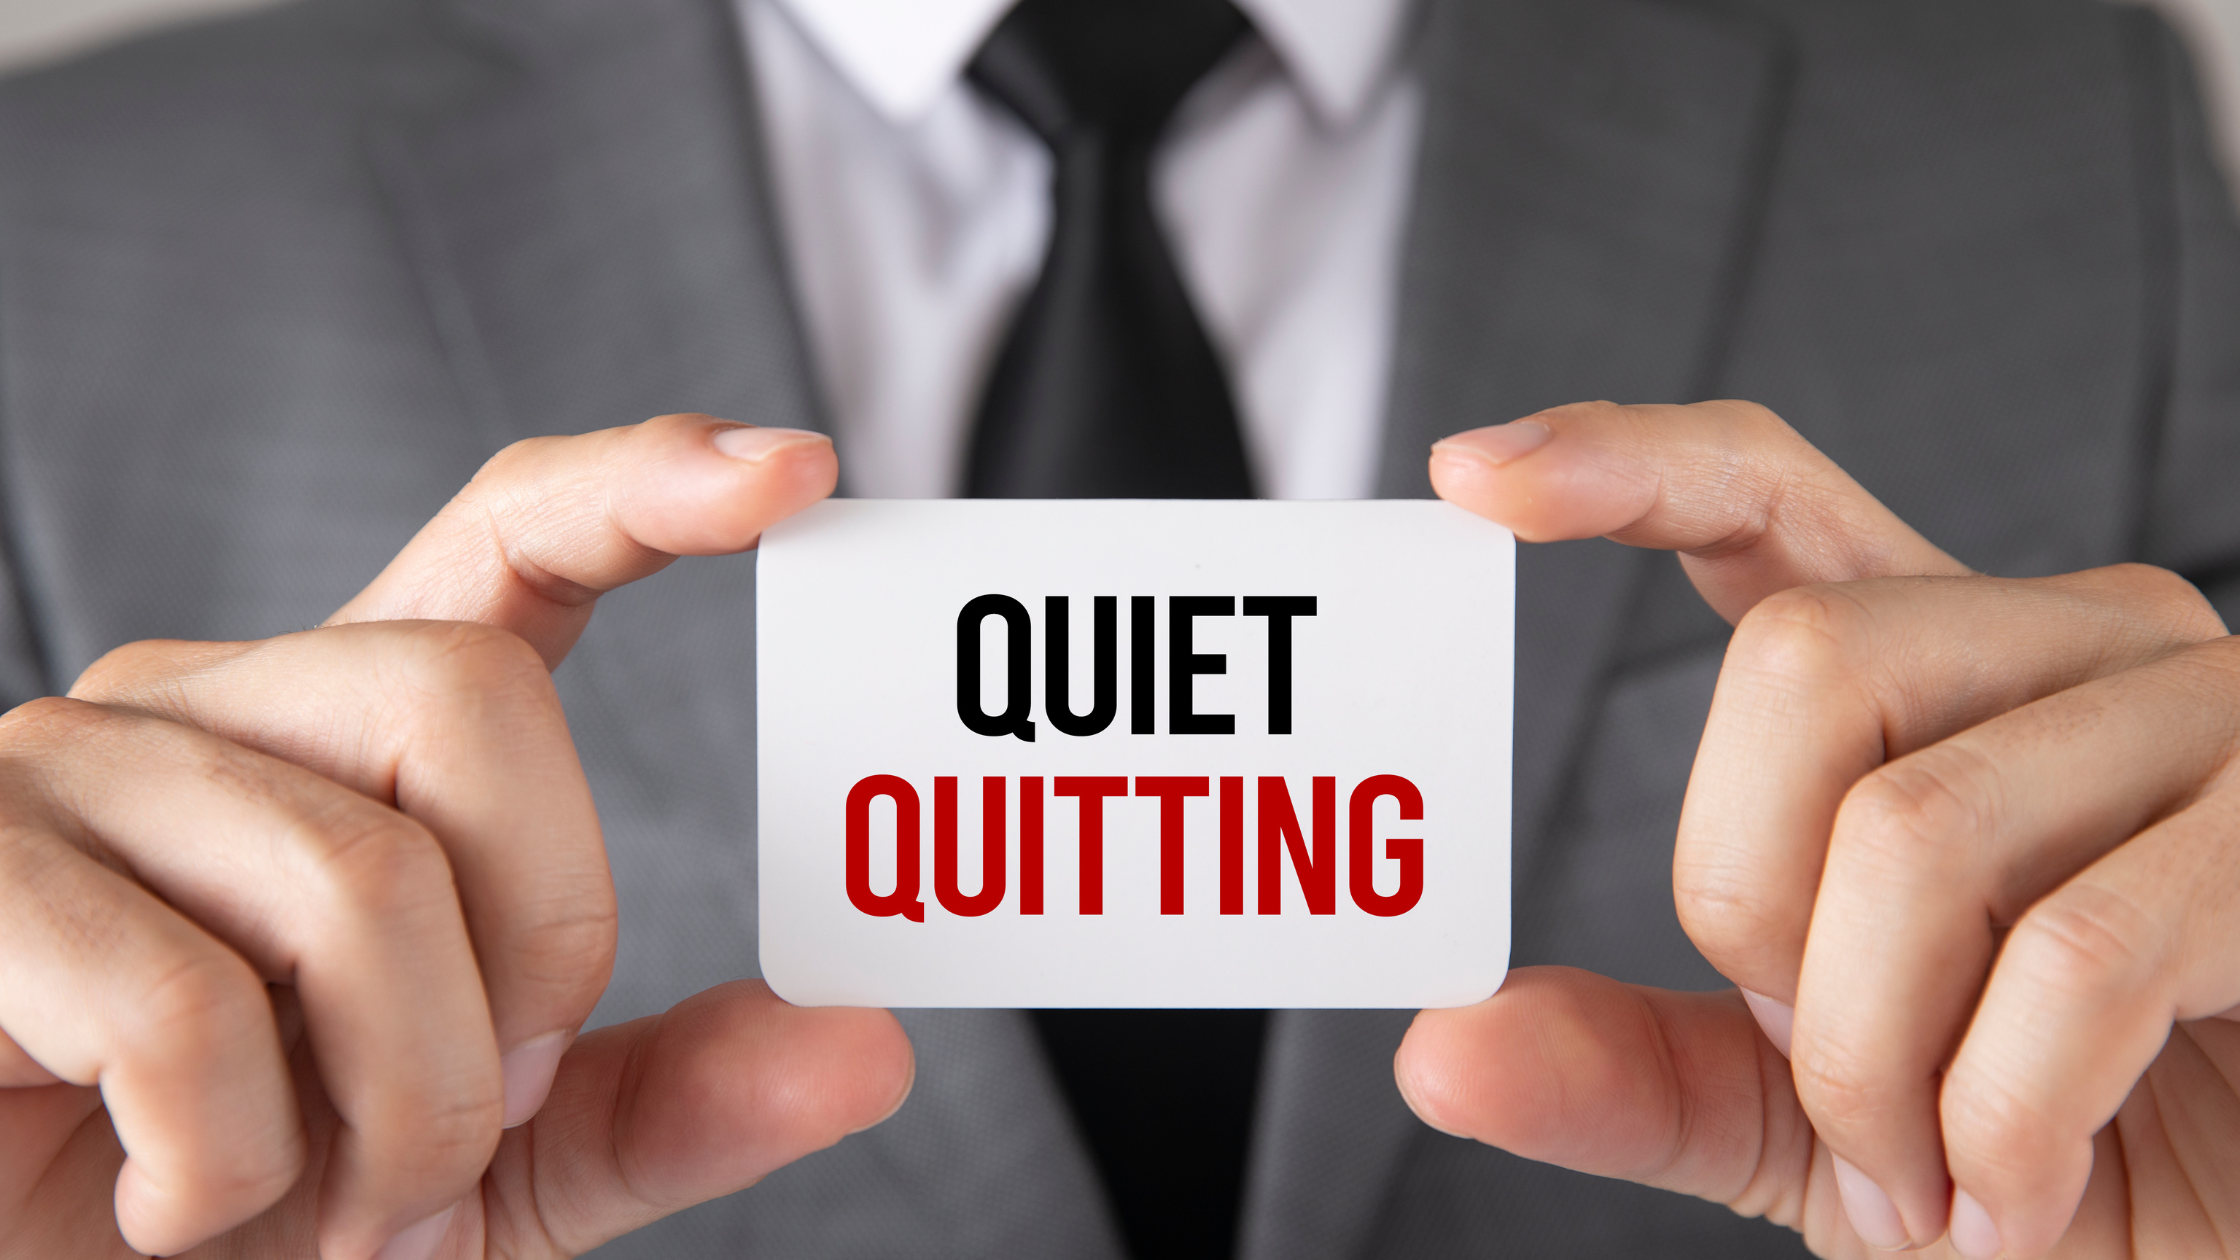 What Is "Quiet Quitting" In The Workplace?